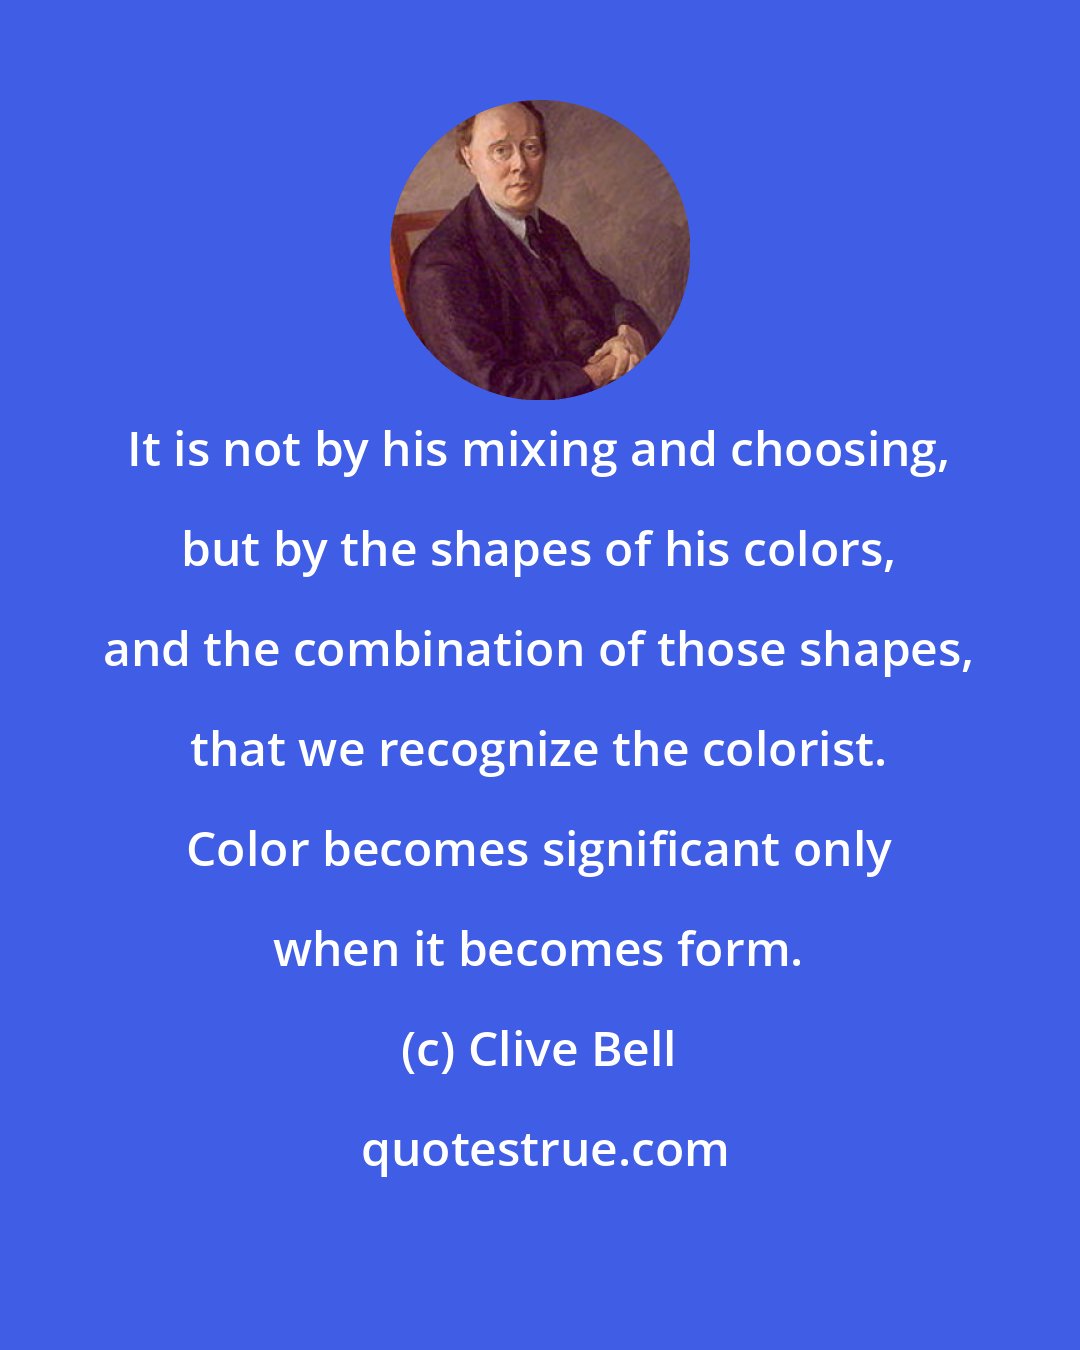 Clive Bell: It is not by his mixing and choosing, but by the shapes of his colors, and the combination of those shapes, that we recognize the colorist. Color becomes significant only when it becomes form.